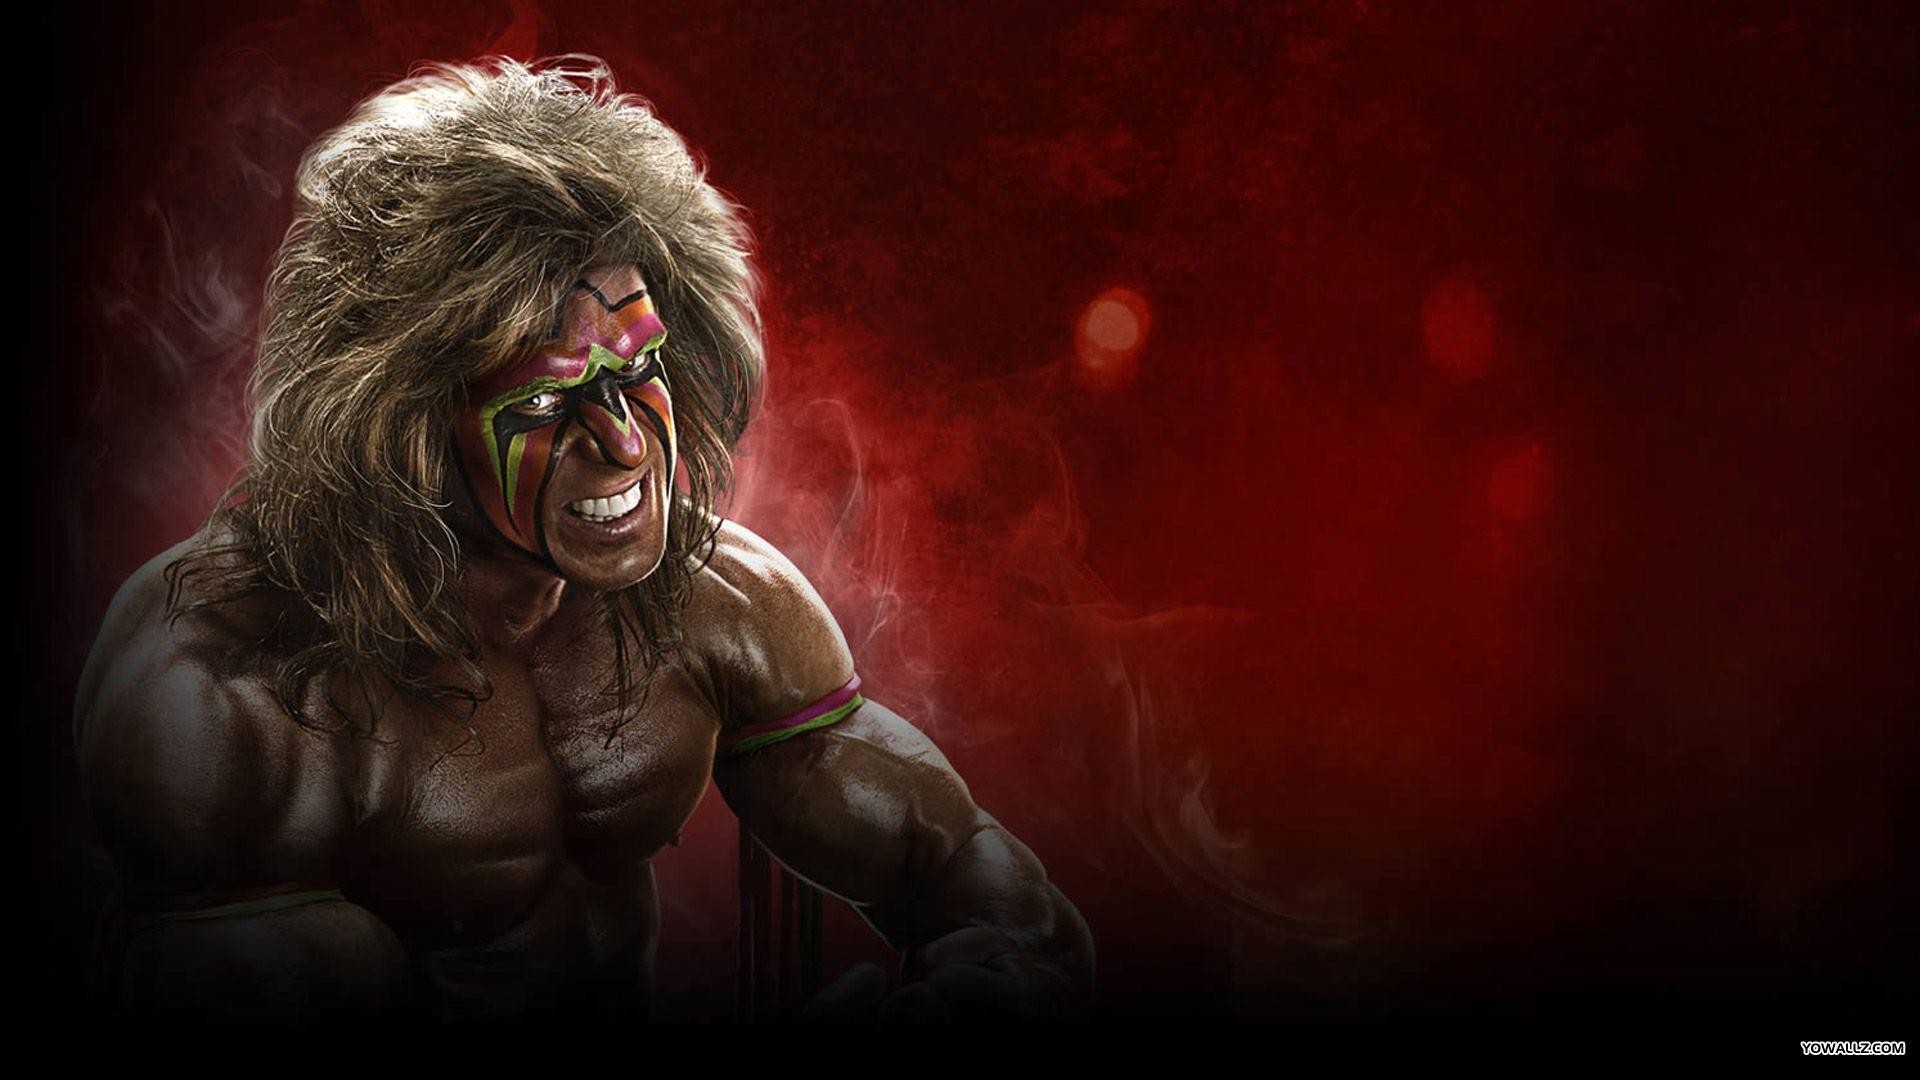 The Ultimate Warrior Wallpapers.